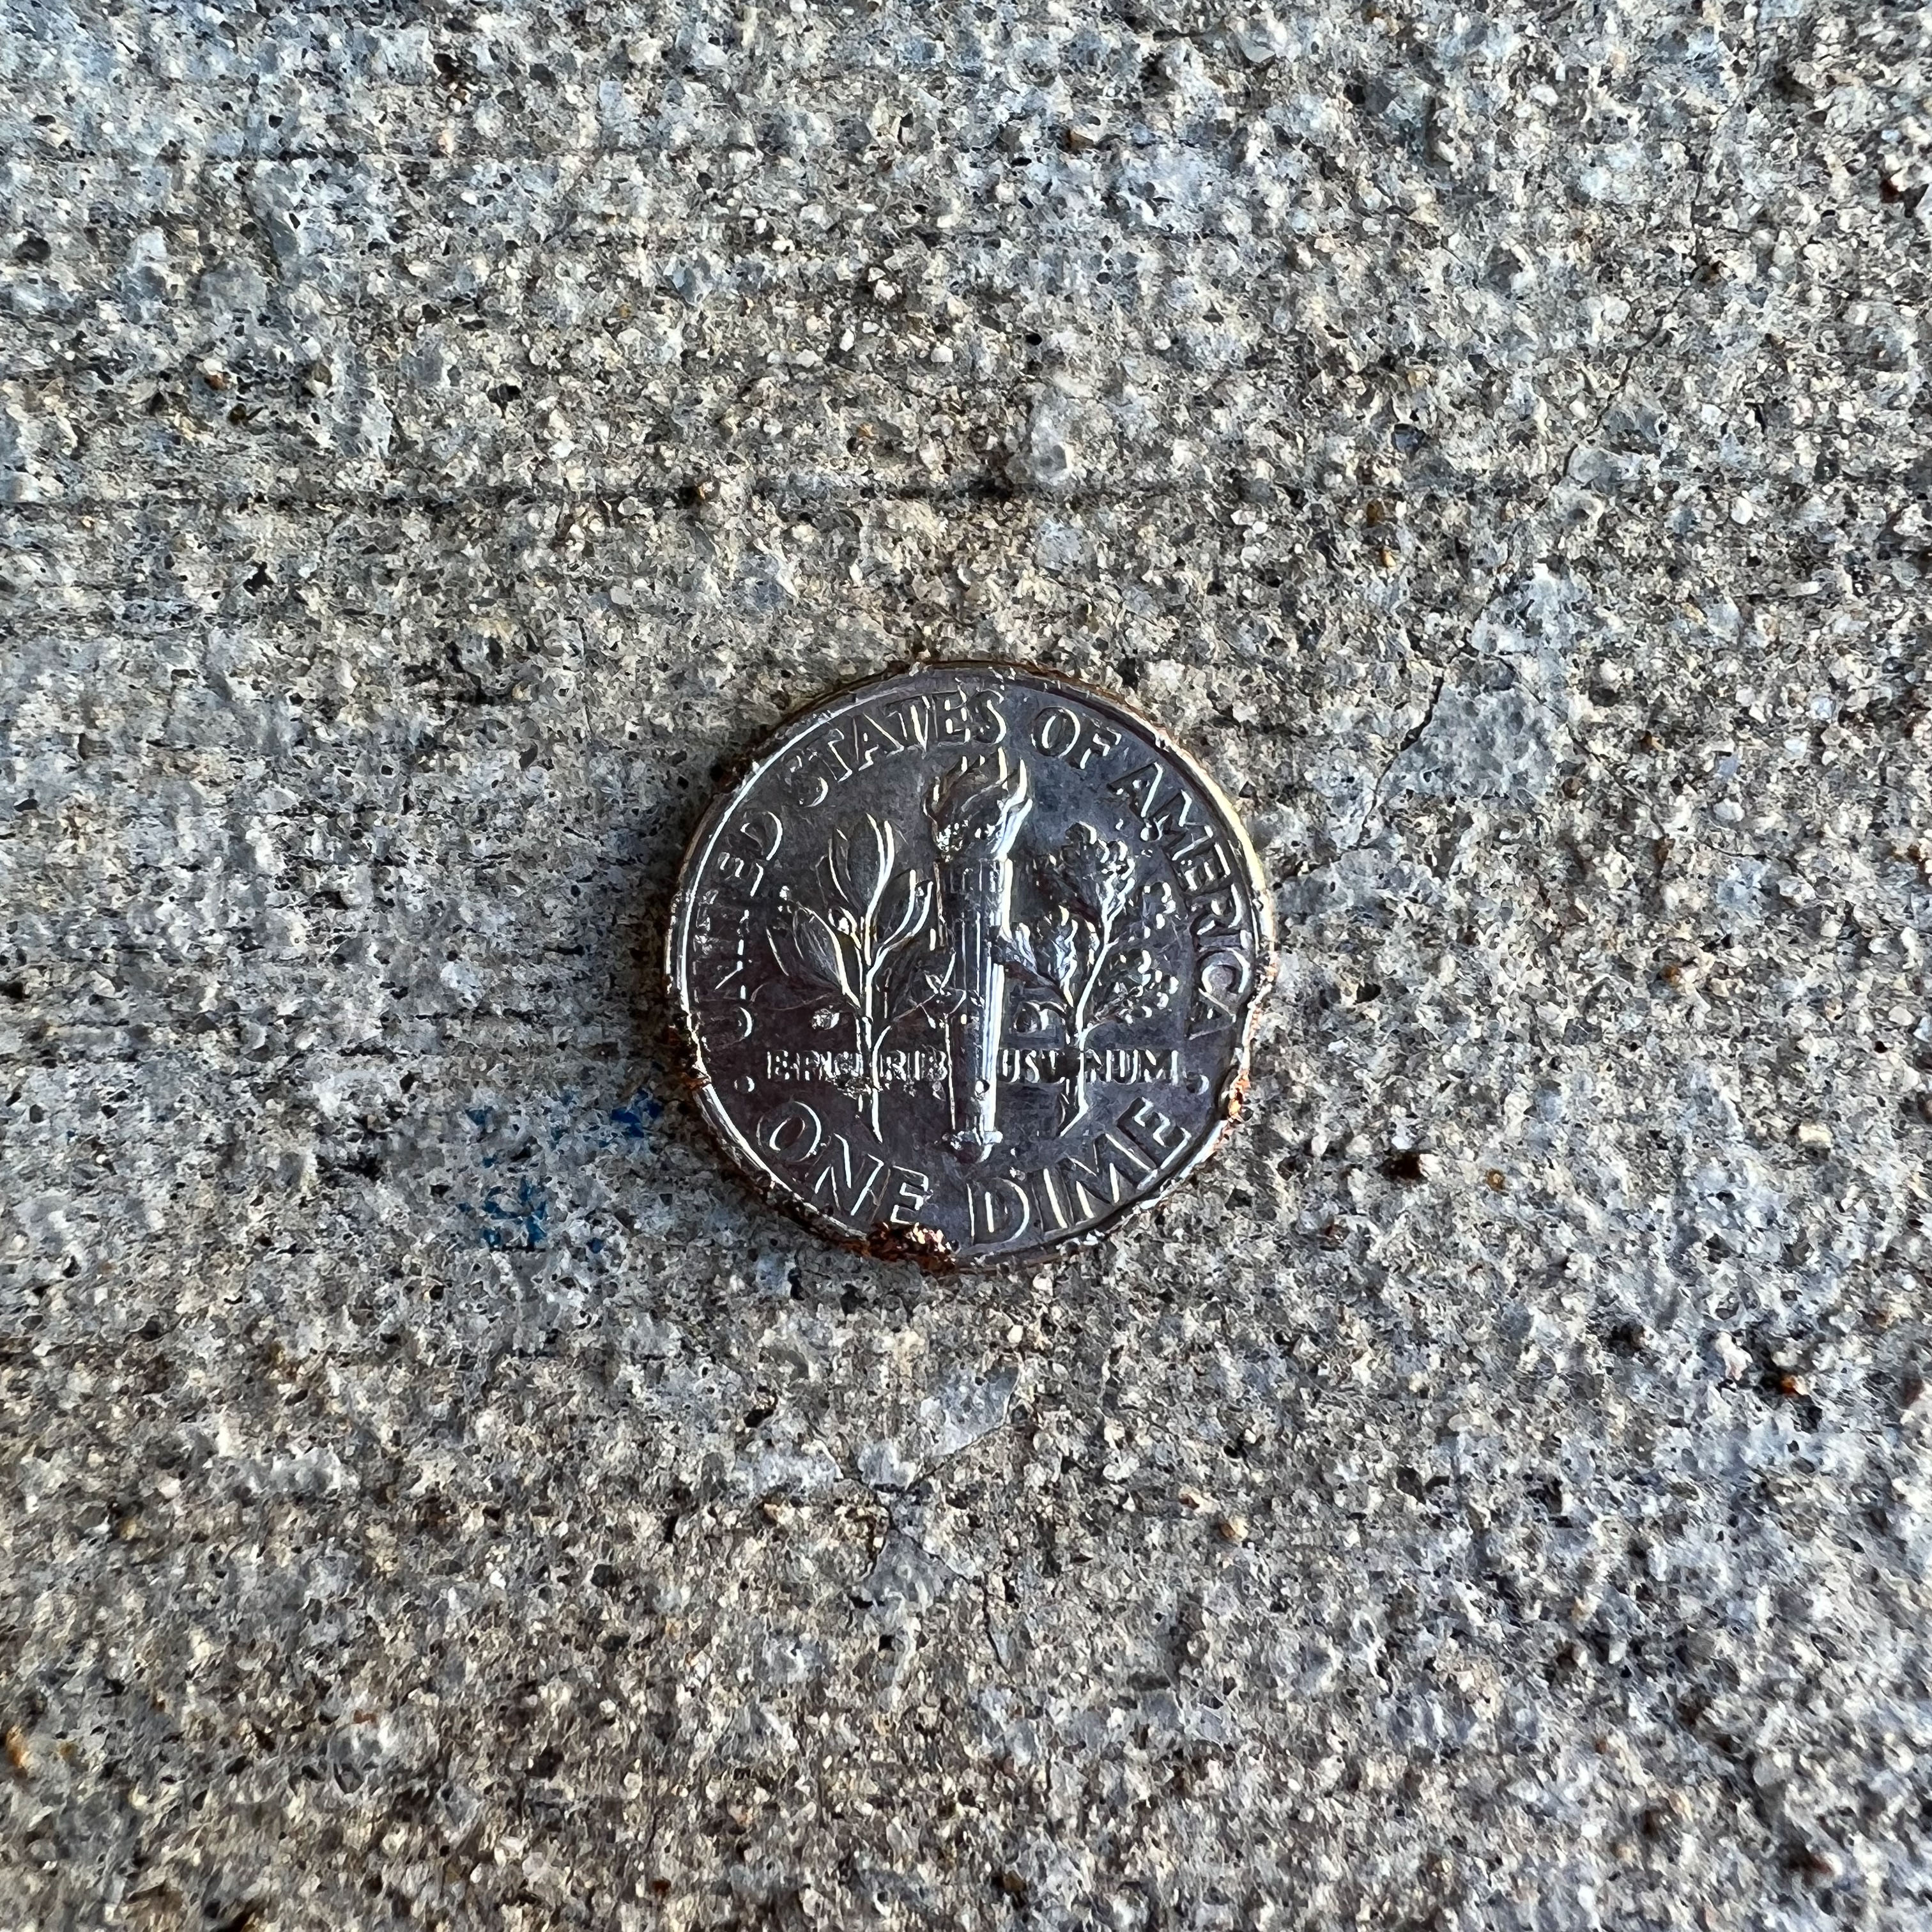 Tail side of a dime